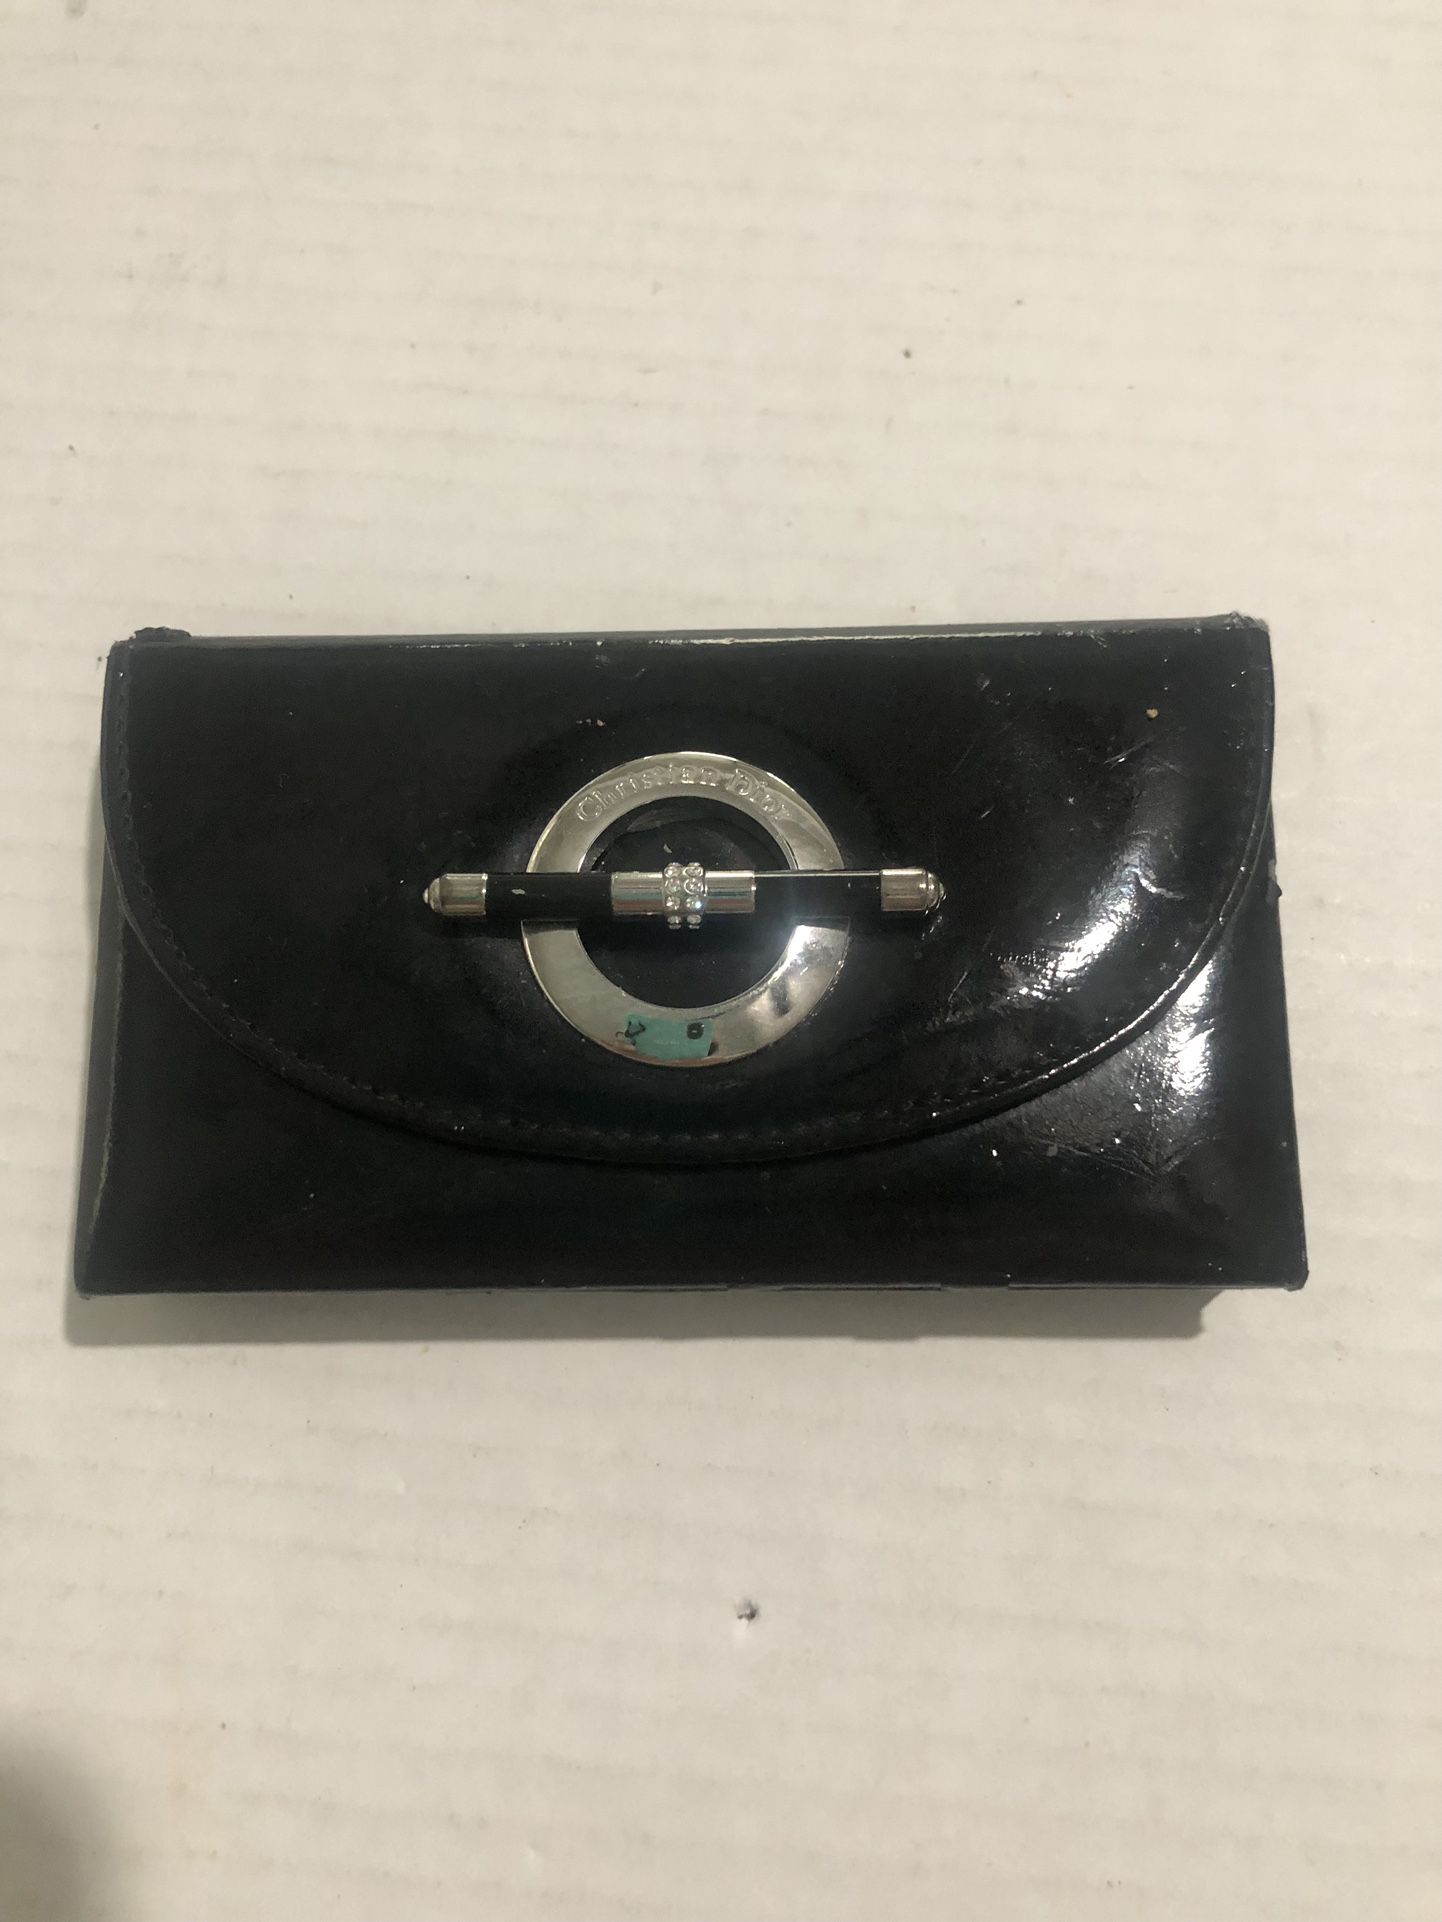 Authentic Exclusive Christian Dior Jazzclub Eyeshadow  Gently used  Used for a Smokey Eye Look for a Bridal Party  Case has a couple nicks  Retails $3